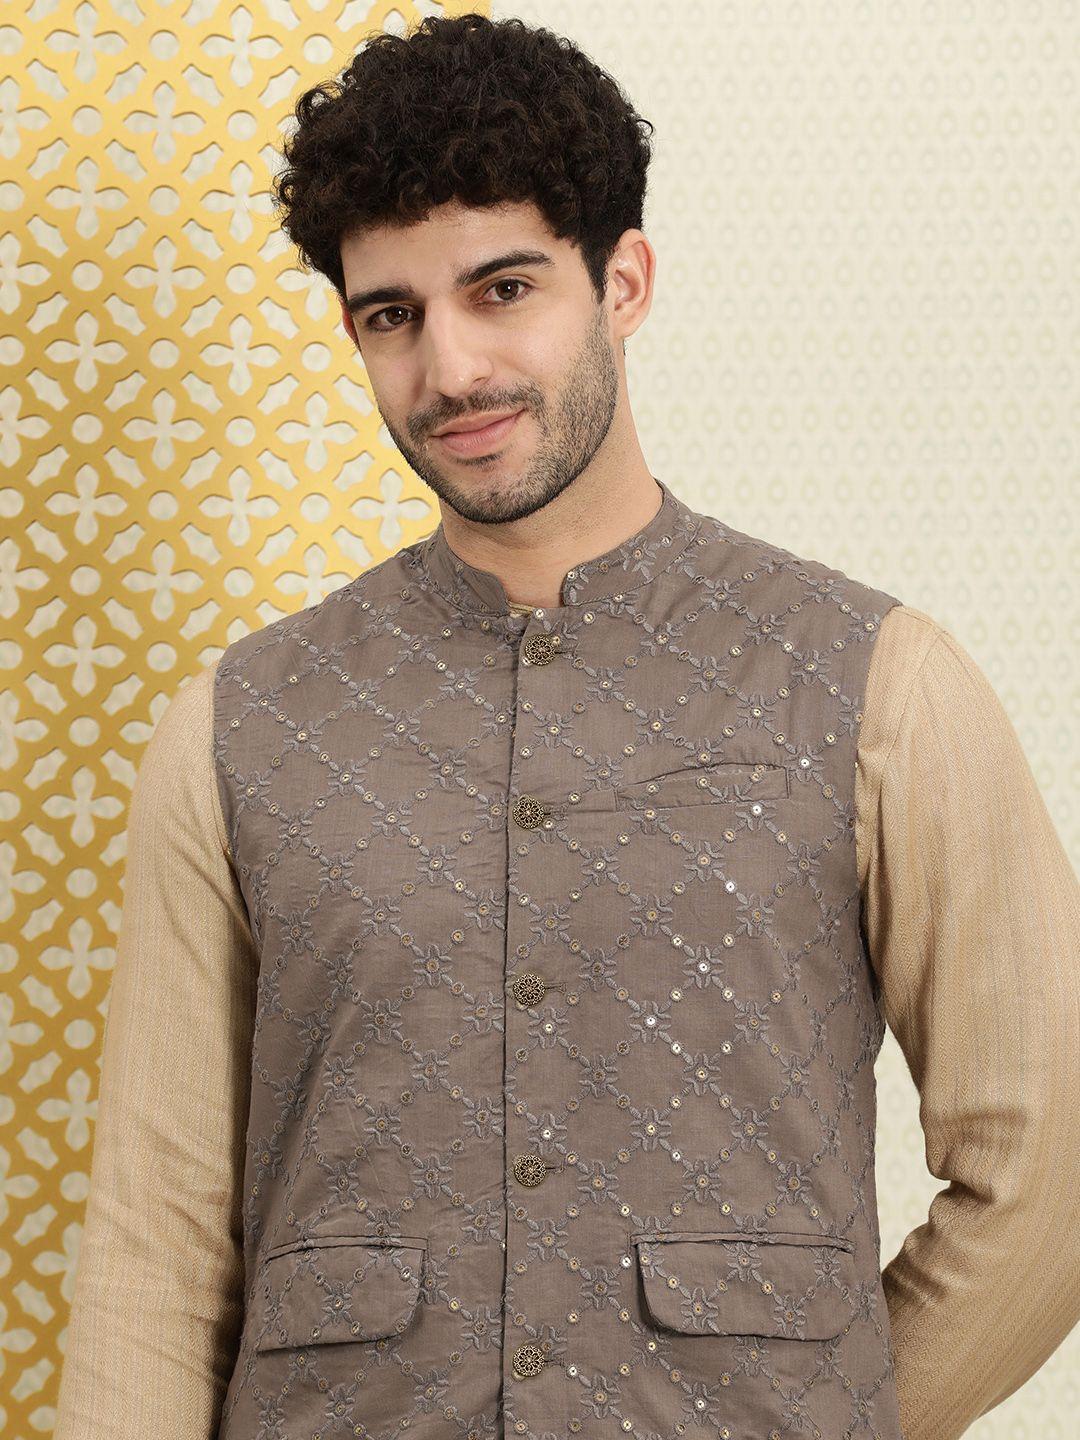 house of pataudi jashn sequined & floral embroidered pure cotton nehru jacket